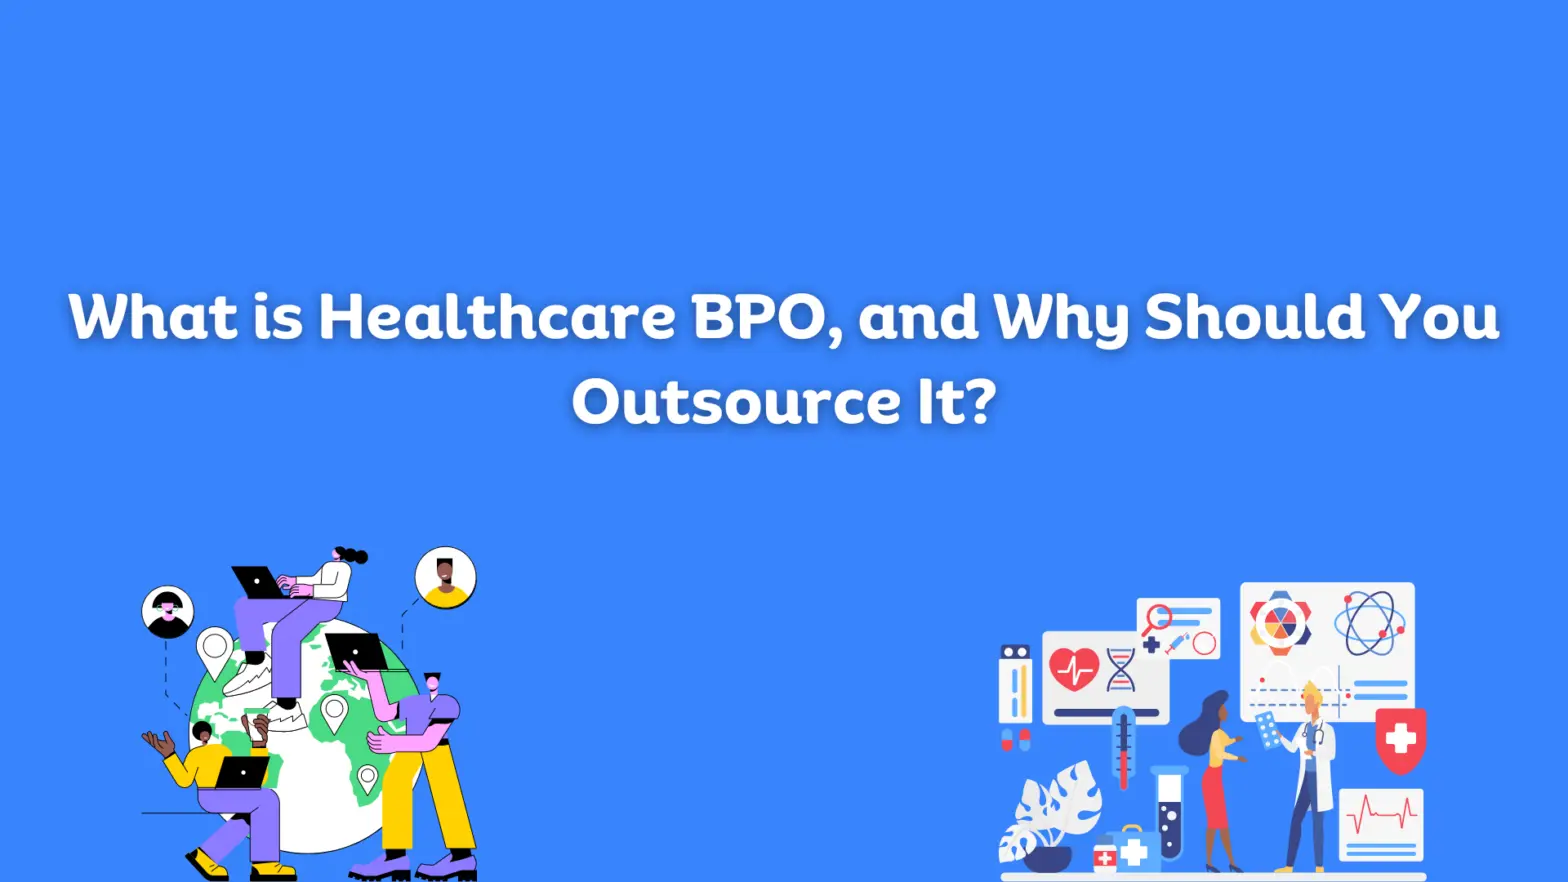 What is Healthcare BPO, and Why Should You Outsource It?